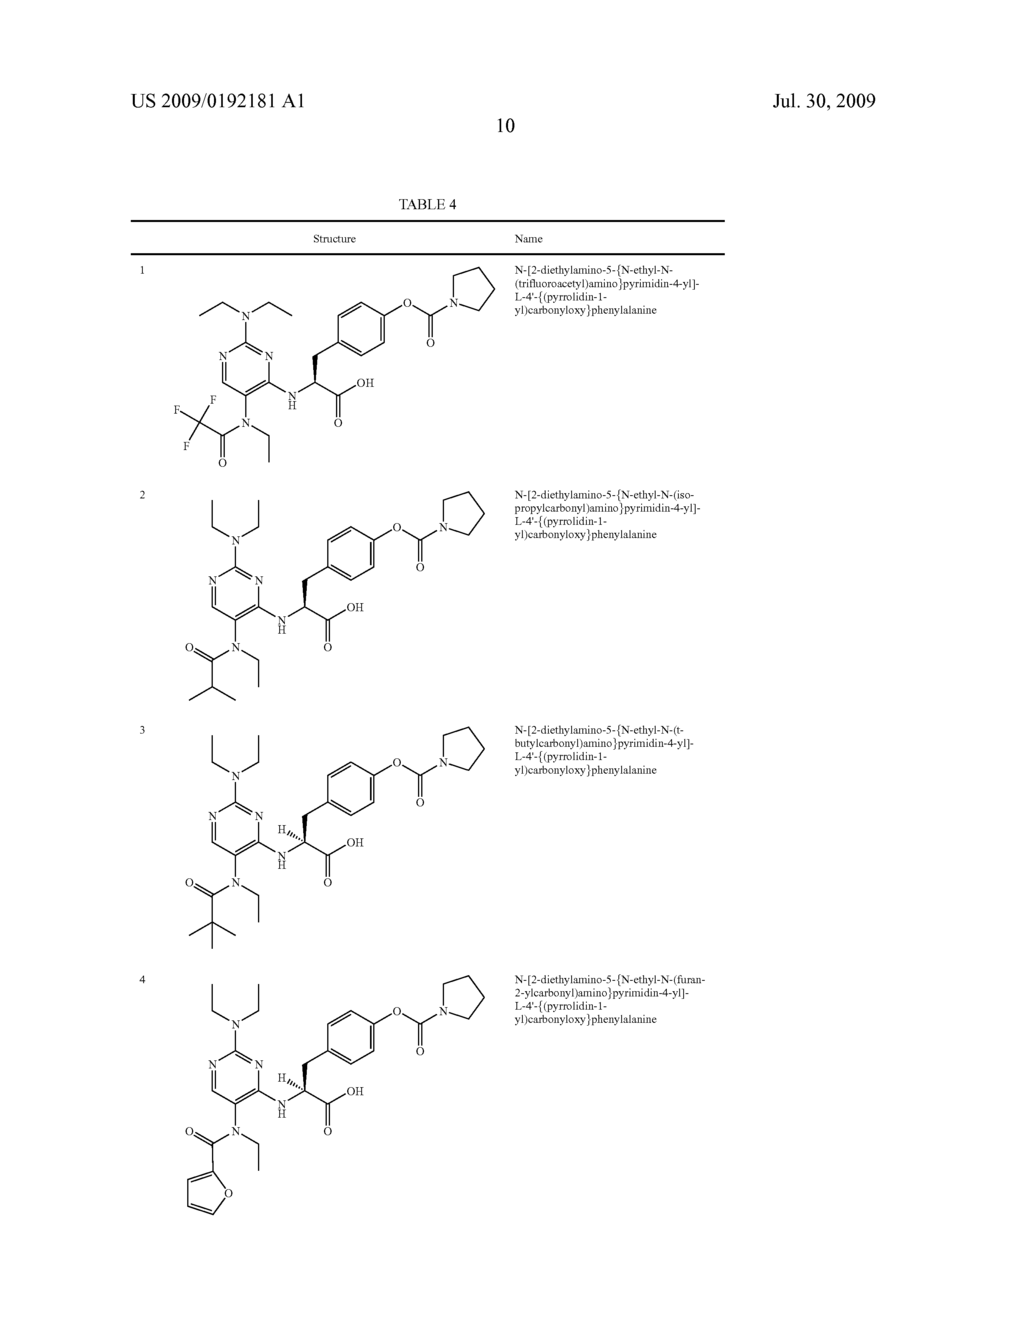 PYRIMIDINYL AMIDE COMPOUNDS WHICH INHIBIT LEUKOCYTE ADHESION MEDIATED BY VLA-4 - diagram, schematic, and image 11